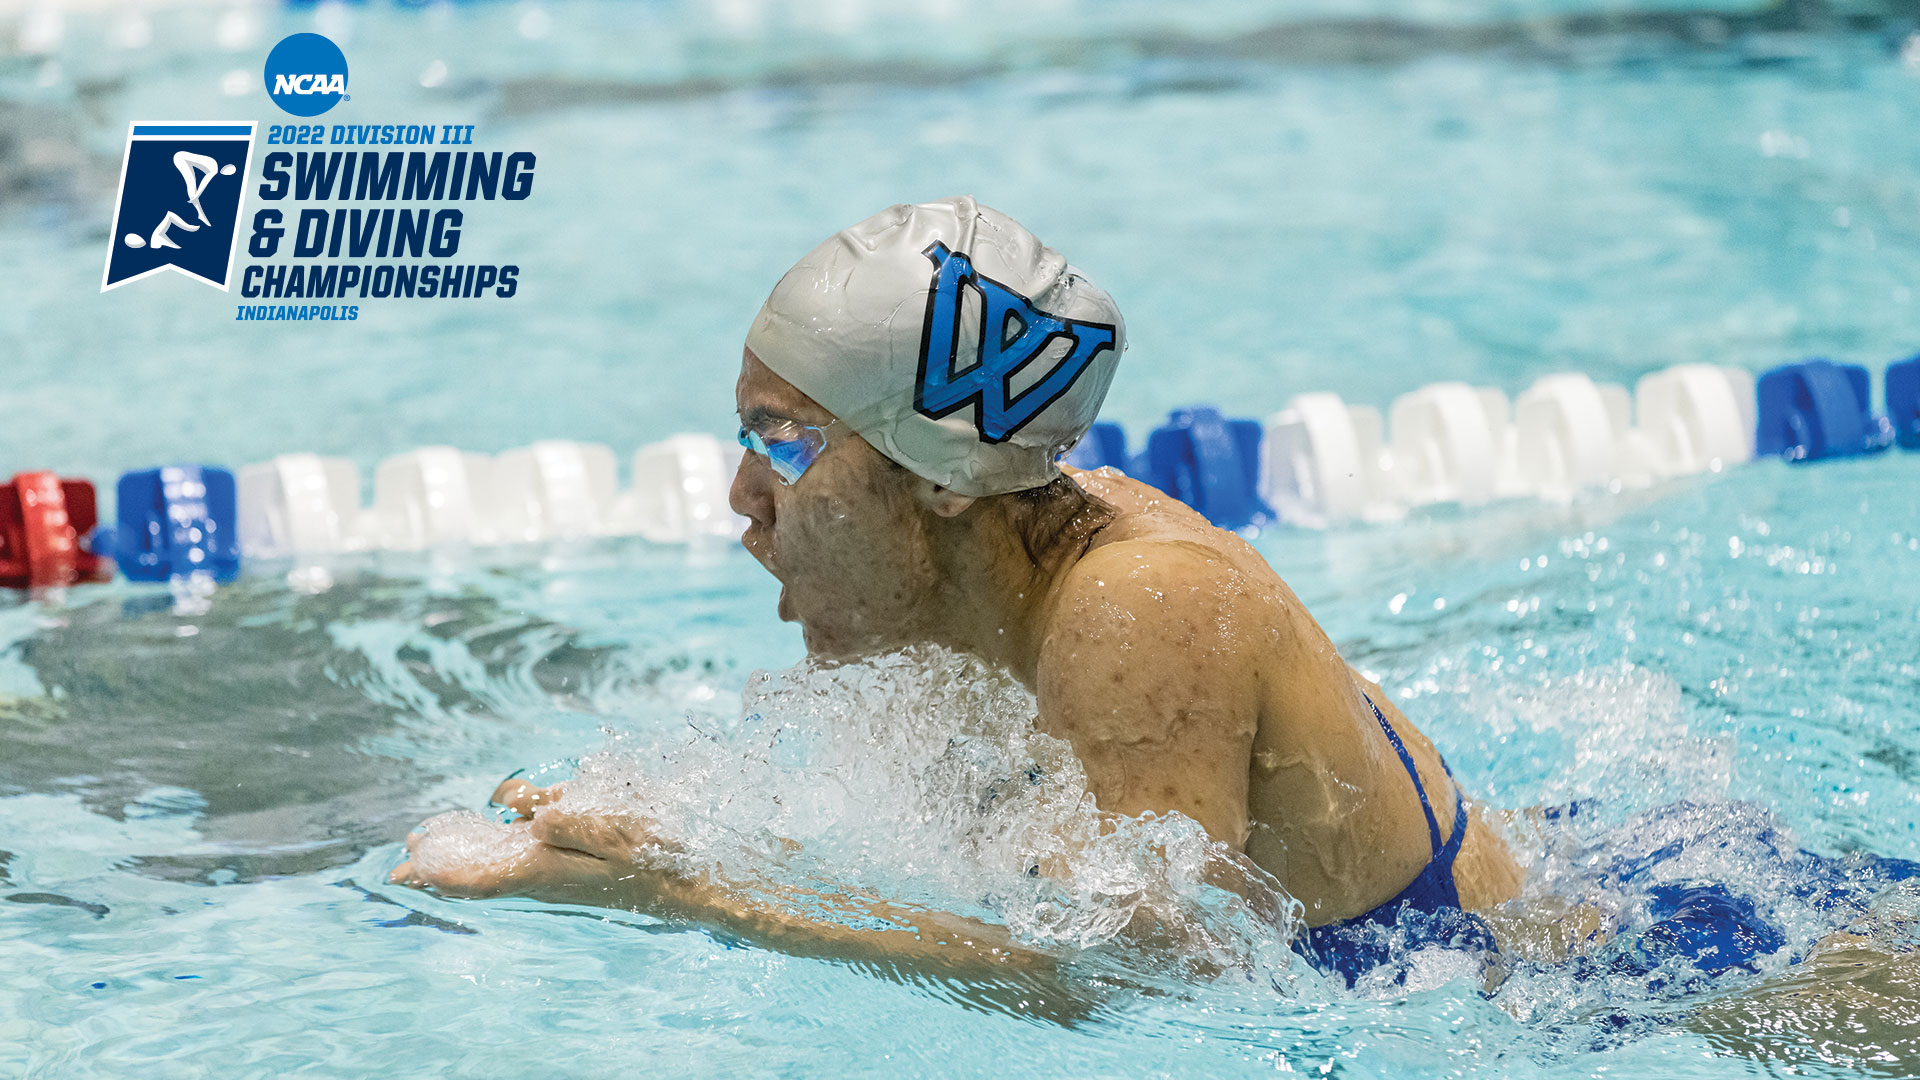 Wellesley's Wegner Places 16th in the 100 Fly at the NCAA Division III Swimming &amp; Diving Championships